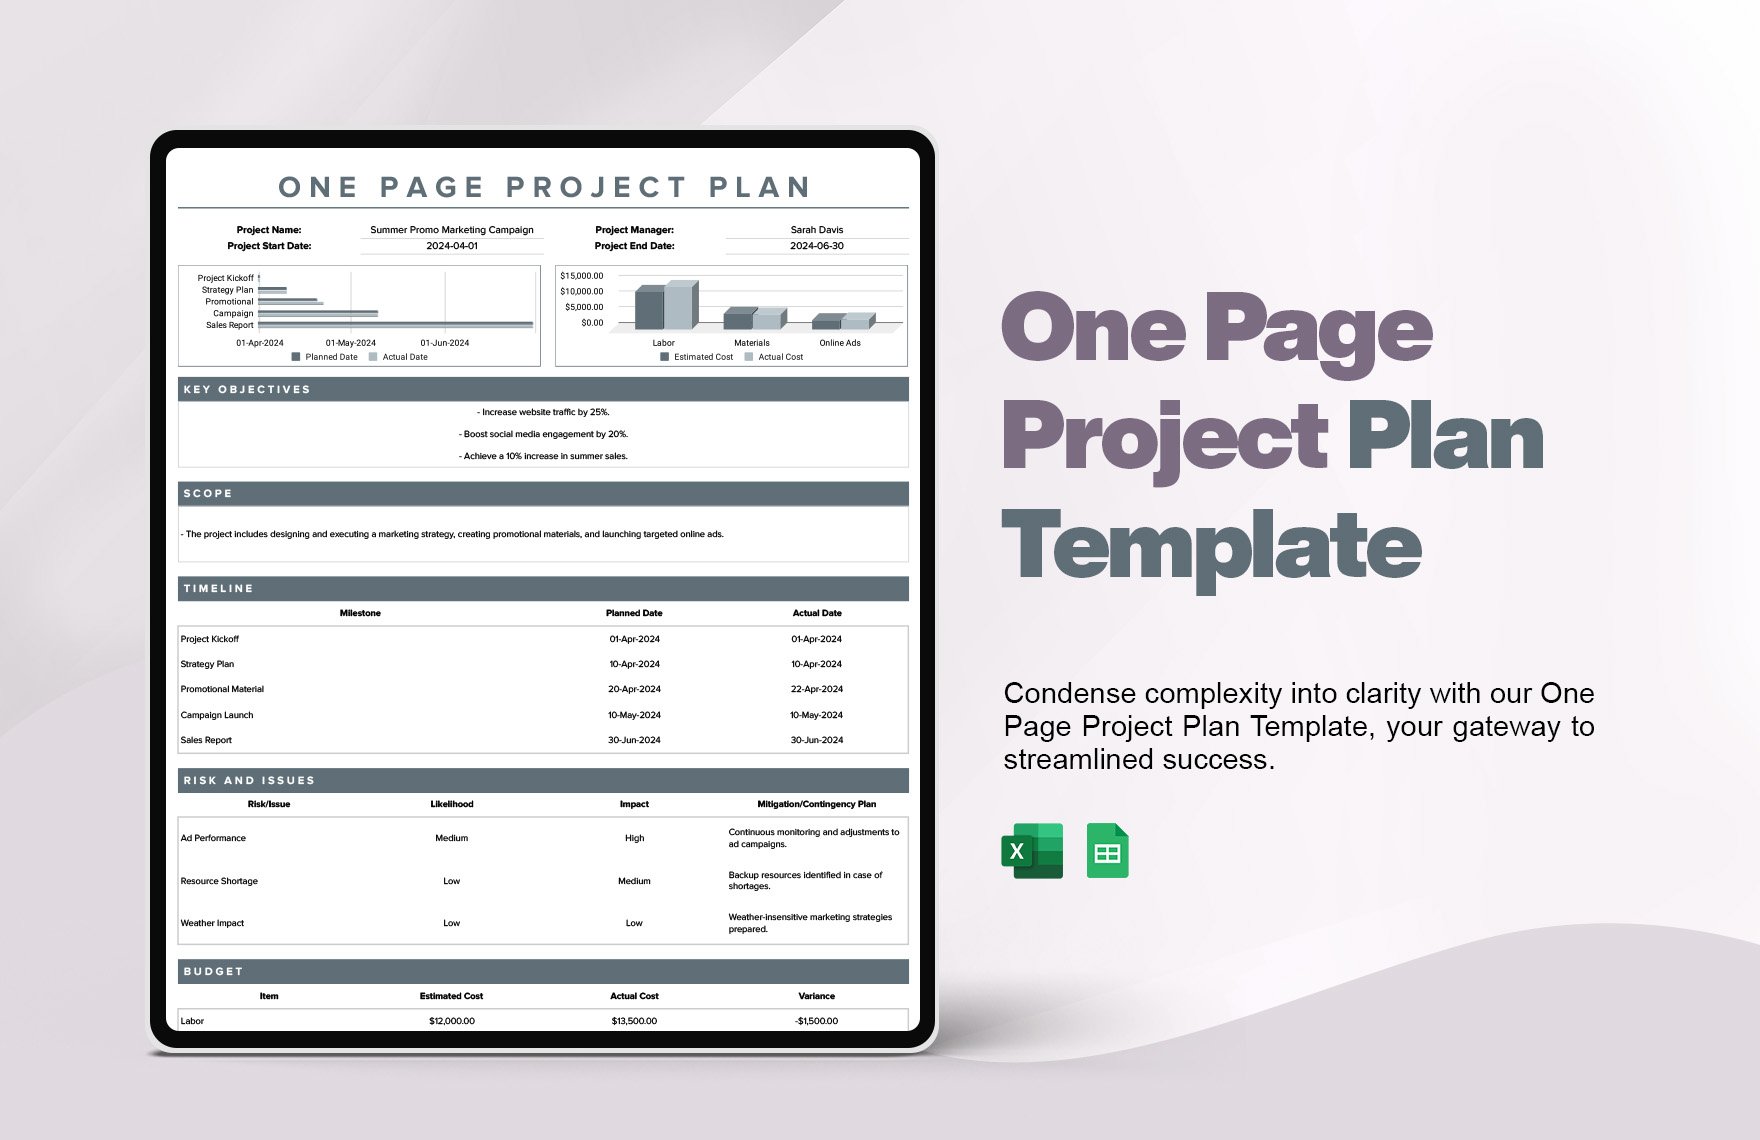 Free One Page Project Plan Template